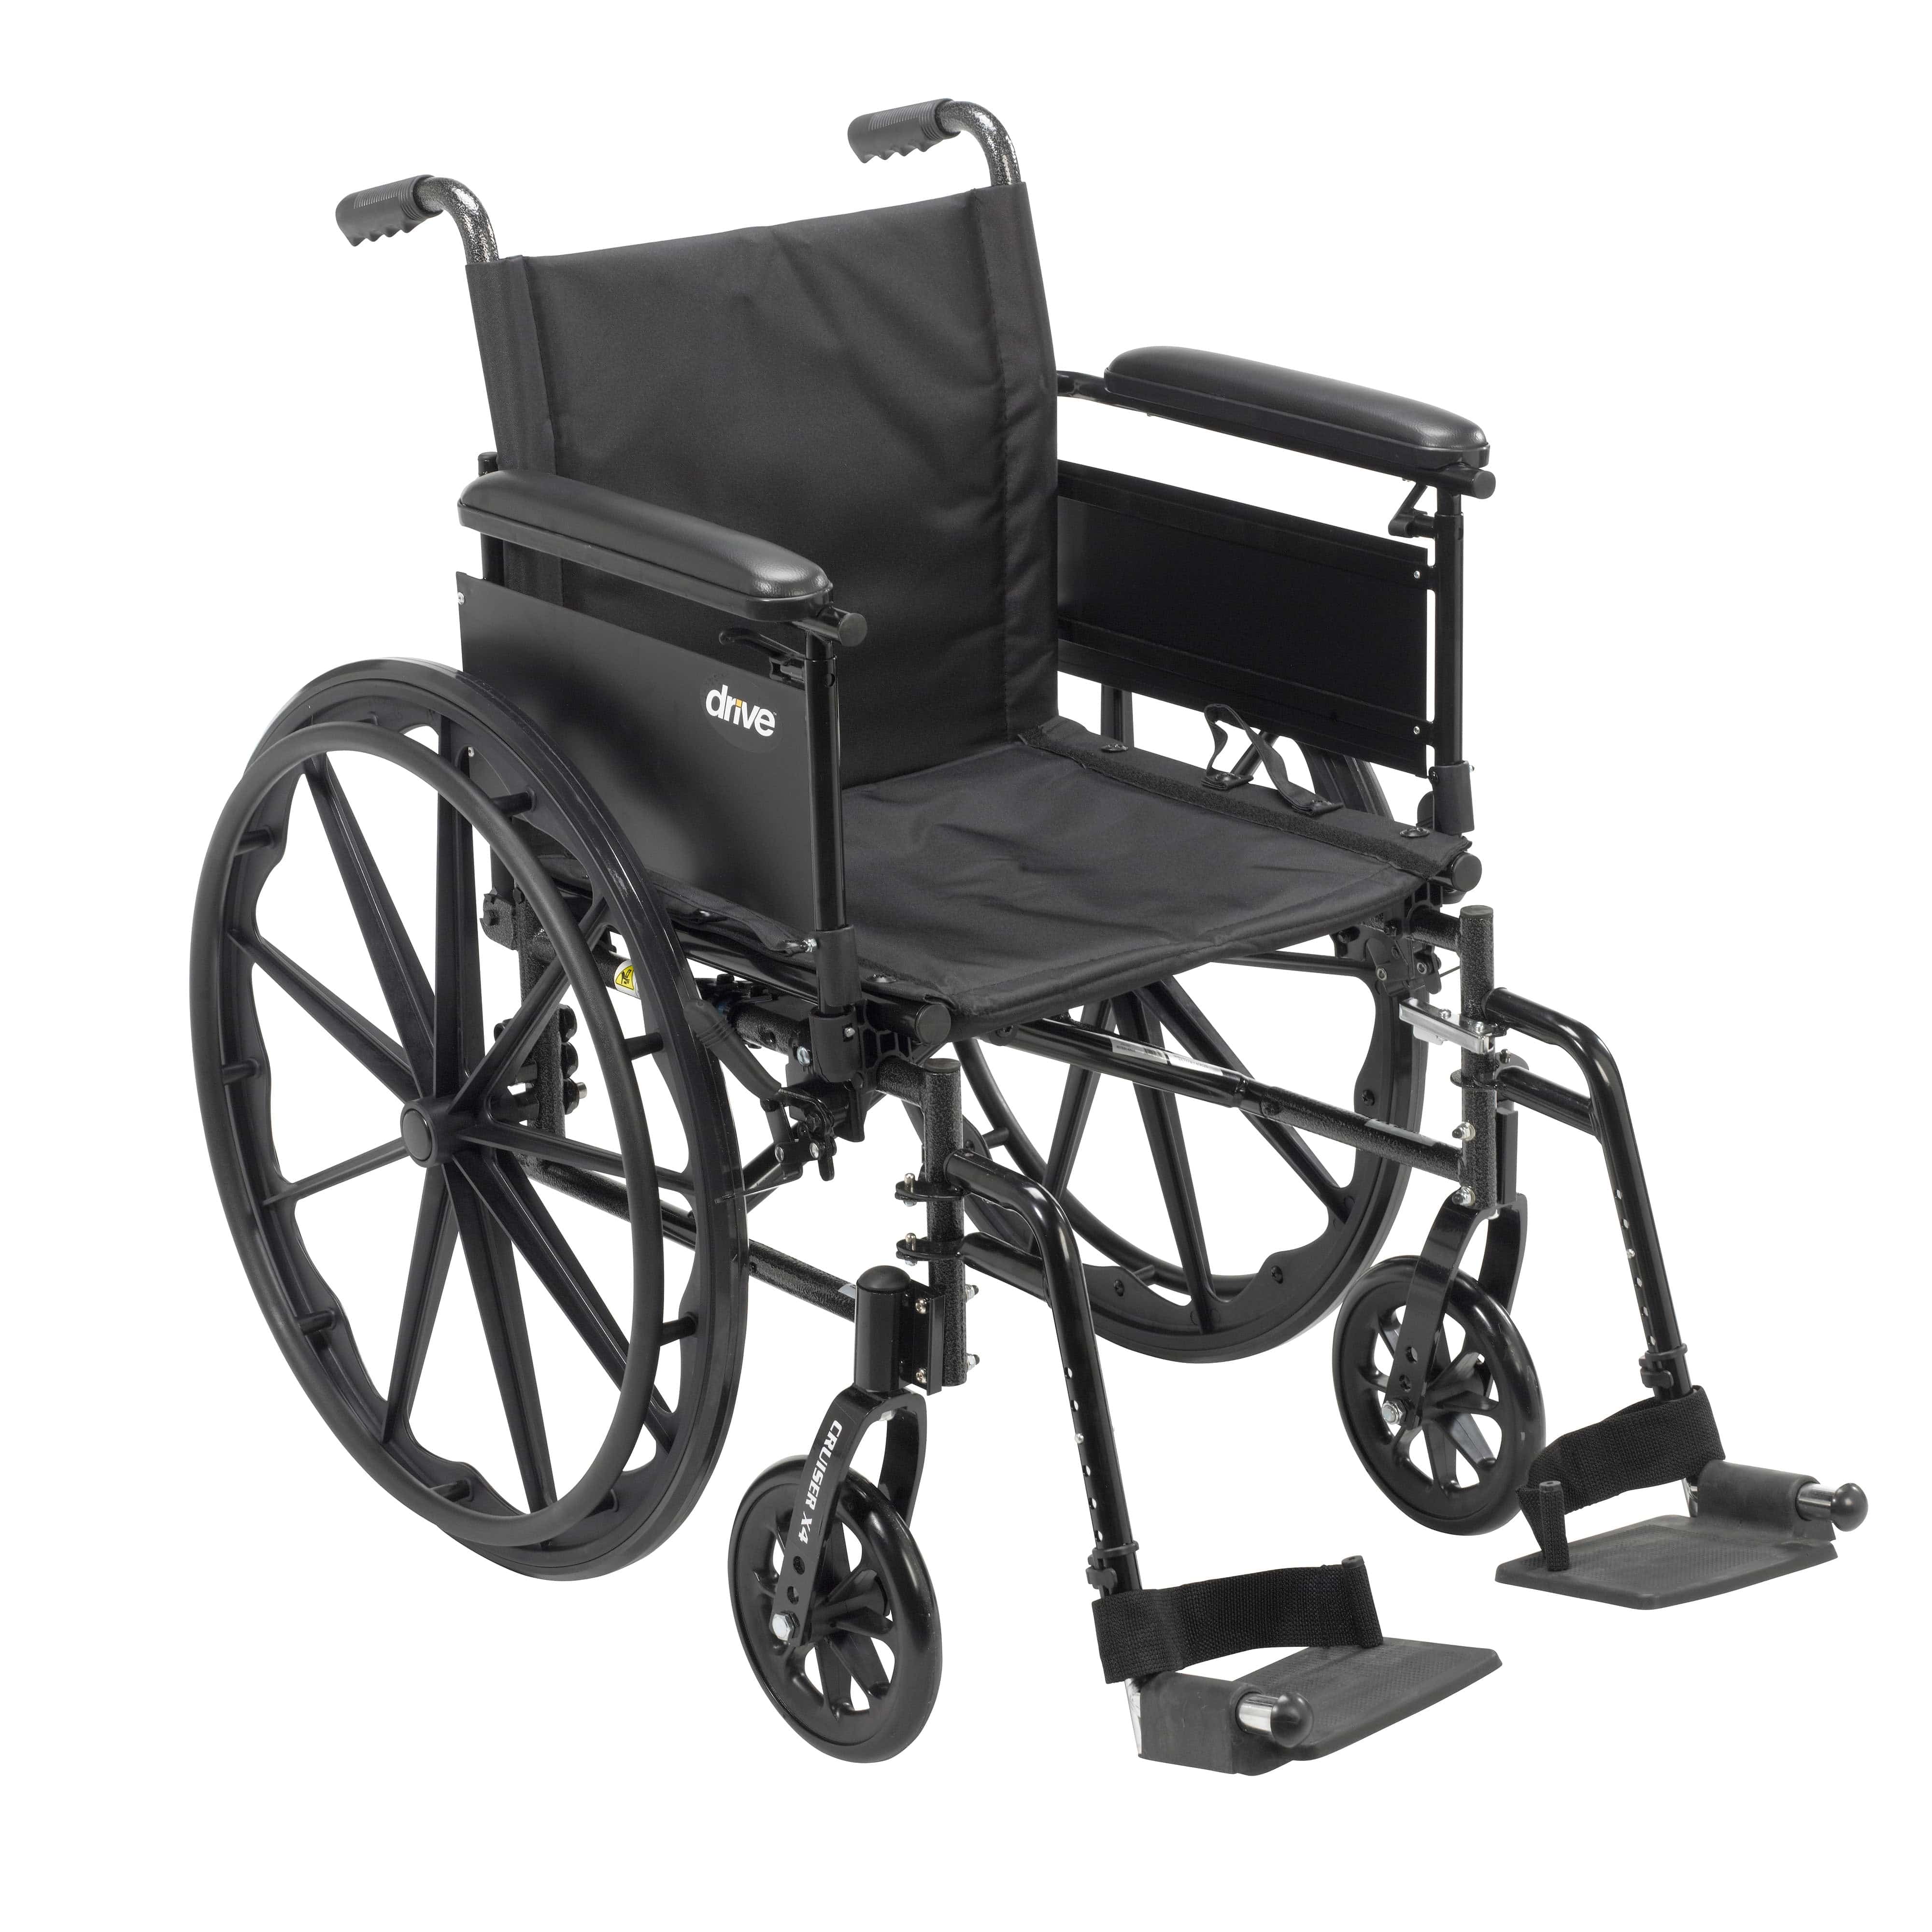 Drive Medical Wheelchairs/Lightweight Wheelchairs Full Arms / Swing Away Footrests / 18" Seat Drive Medical Cruiser X4 Lightweight Dual Axle Wheelchair with Adjustable Detatchable Arms